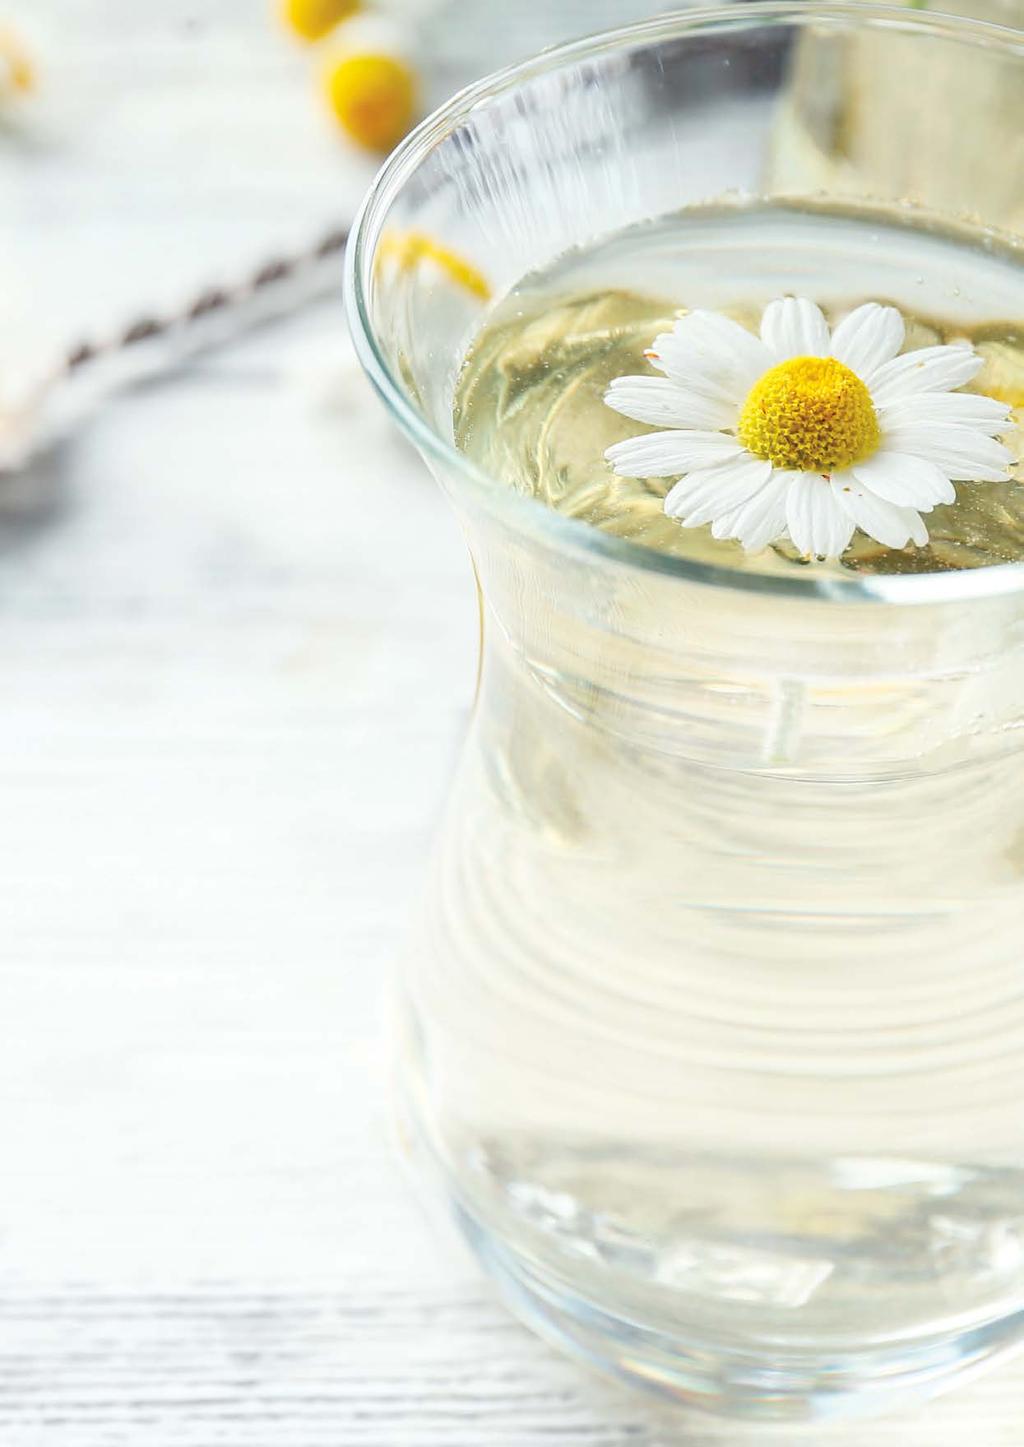 CHAMOMILE A calming blend best for relaxing and unwinding at the end of the day.